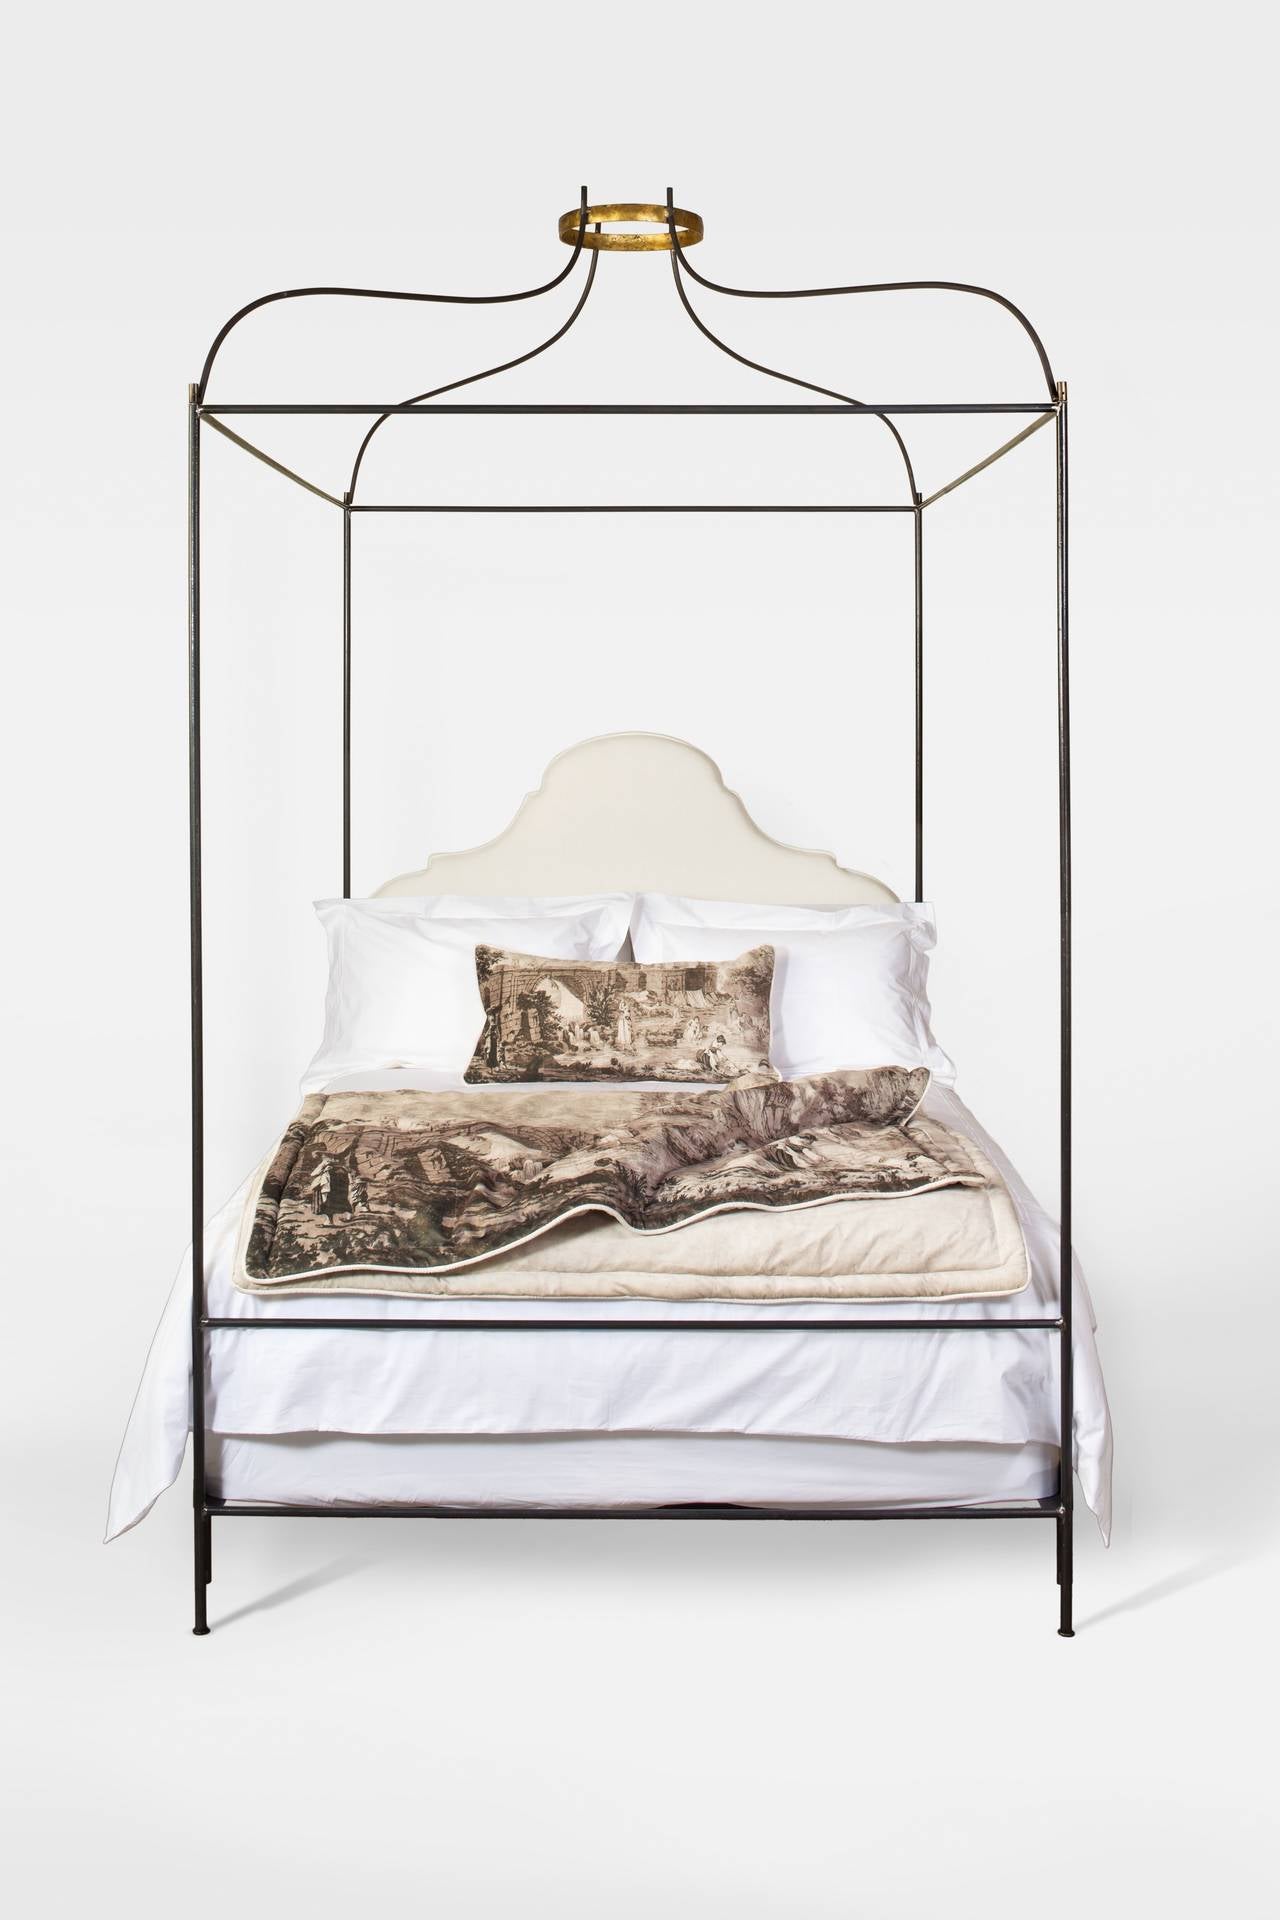 This iron Venetian canopy bed with upholstered headboard from the Tara Shaw Maison collection is one of our most popular custom beds. hand forged gilded or silver leaf crown and small detail at feet. Handcrafted in New Orleans. Standard headboard